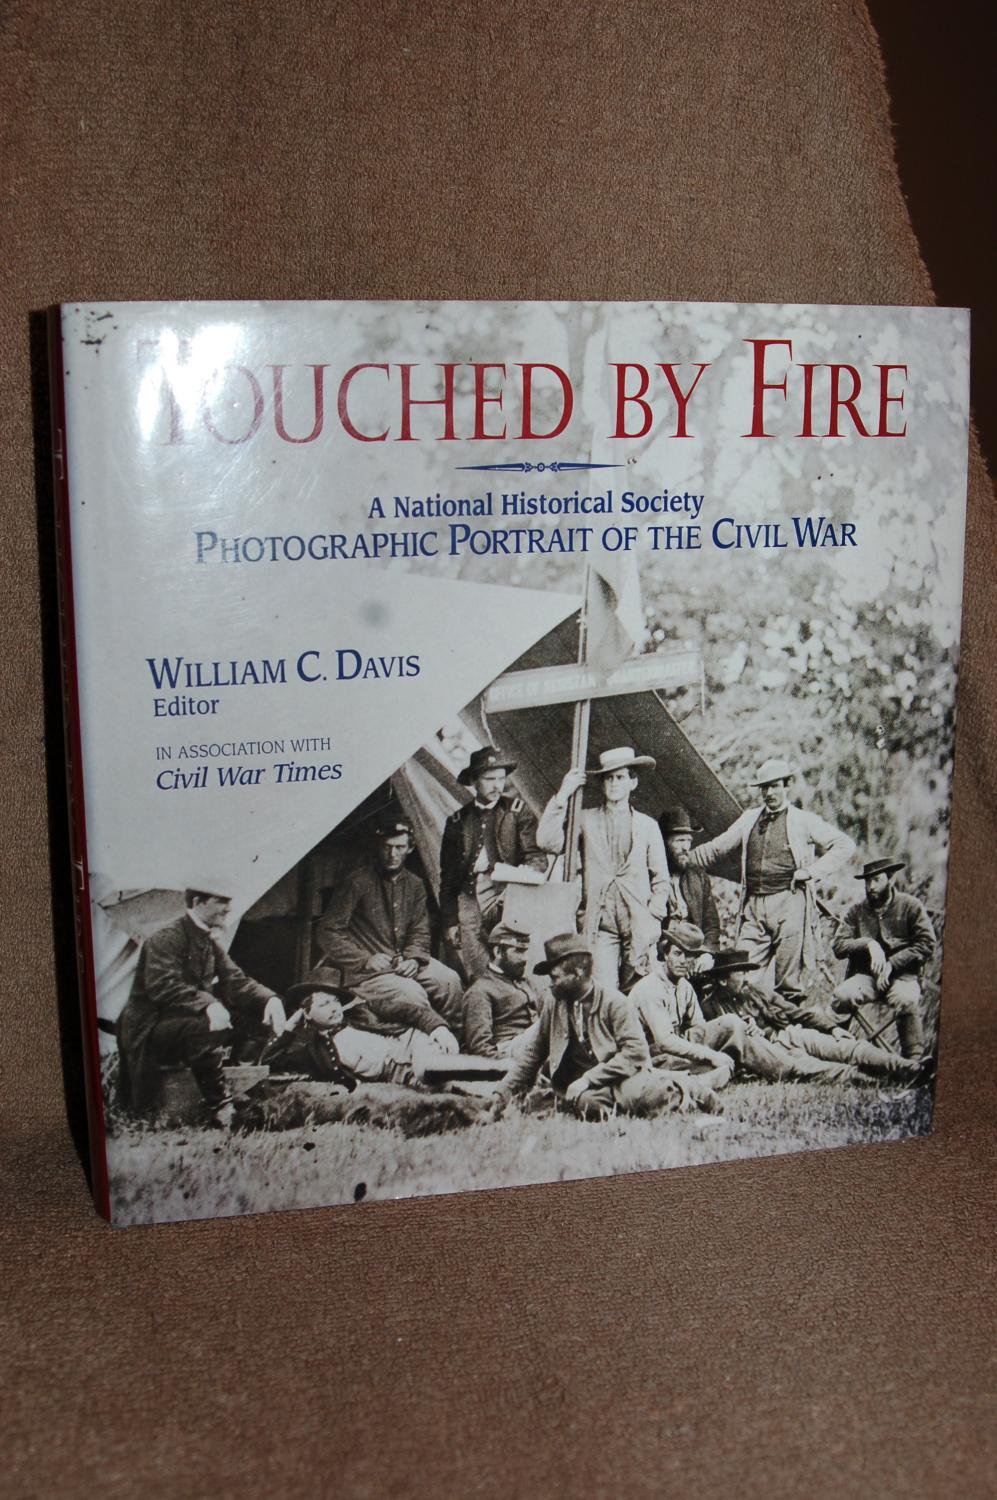 Touched by Fire: A National Historical Society Photographic Portrait of the Civil War: A National Historical Society Photographic Portrait of the Civil War, in Association With Civil War Times